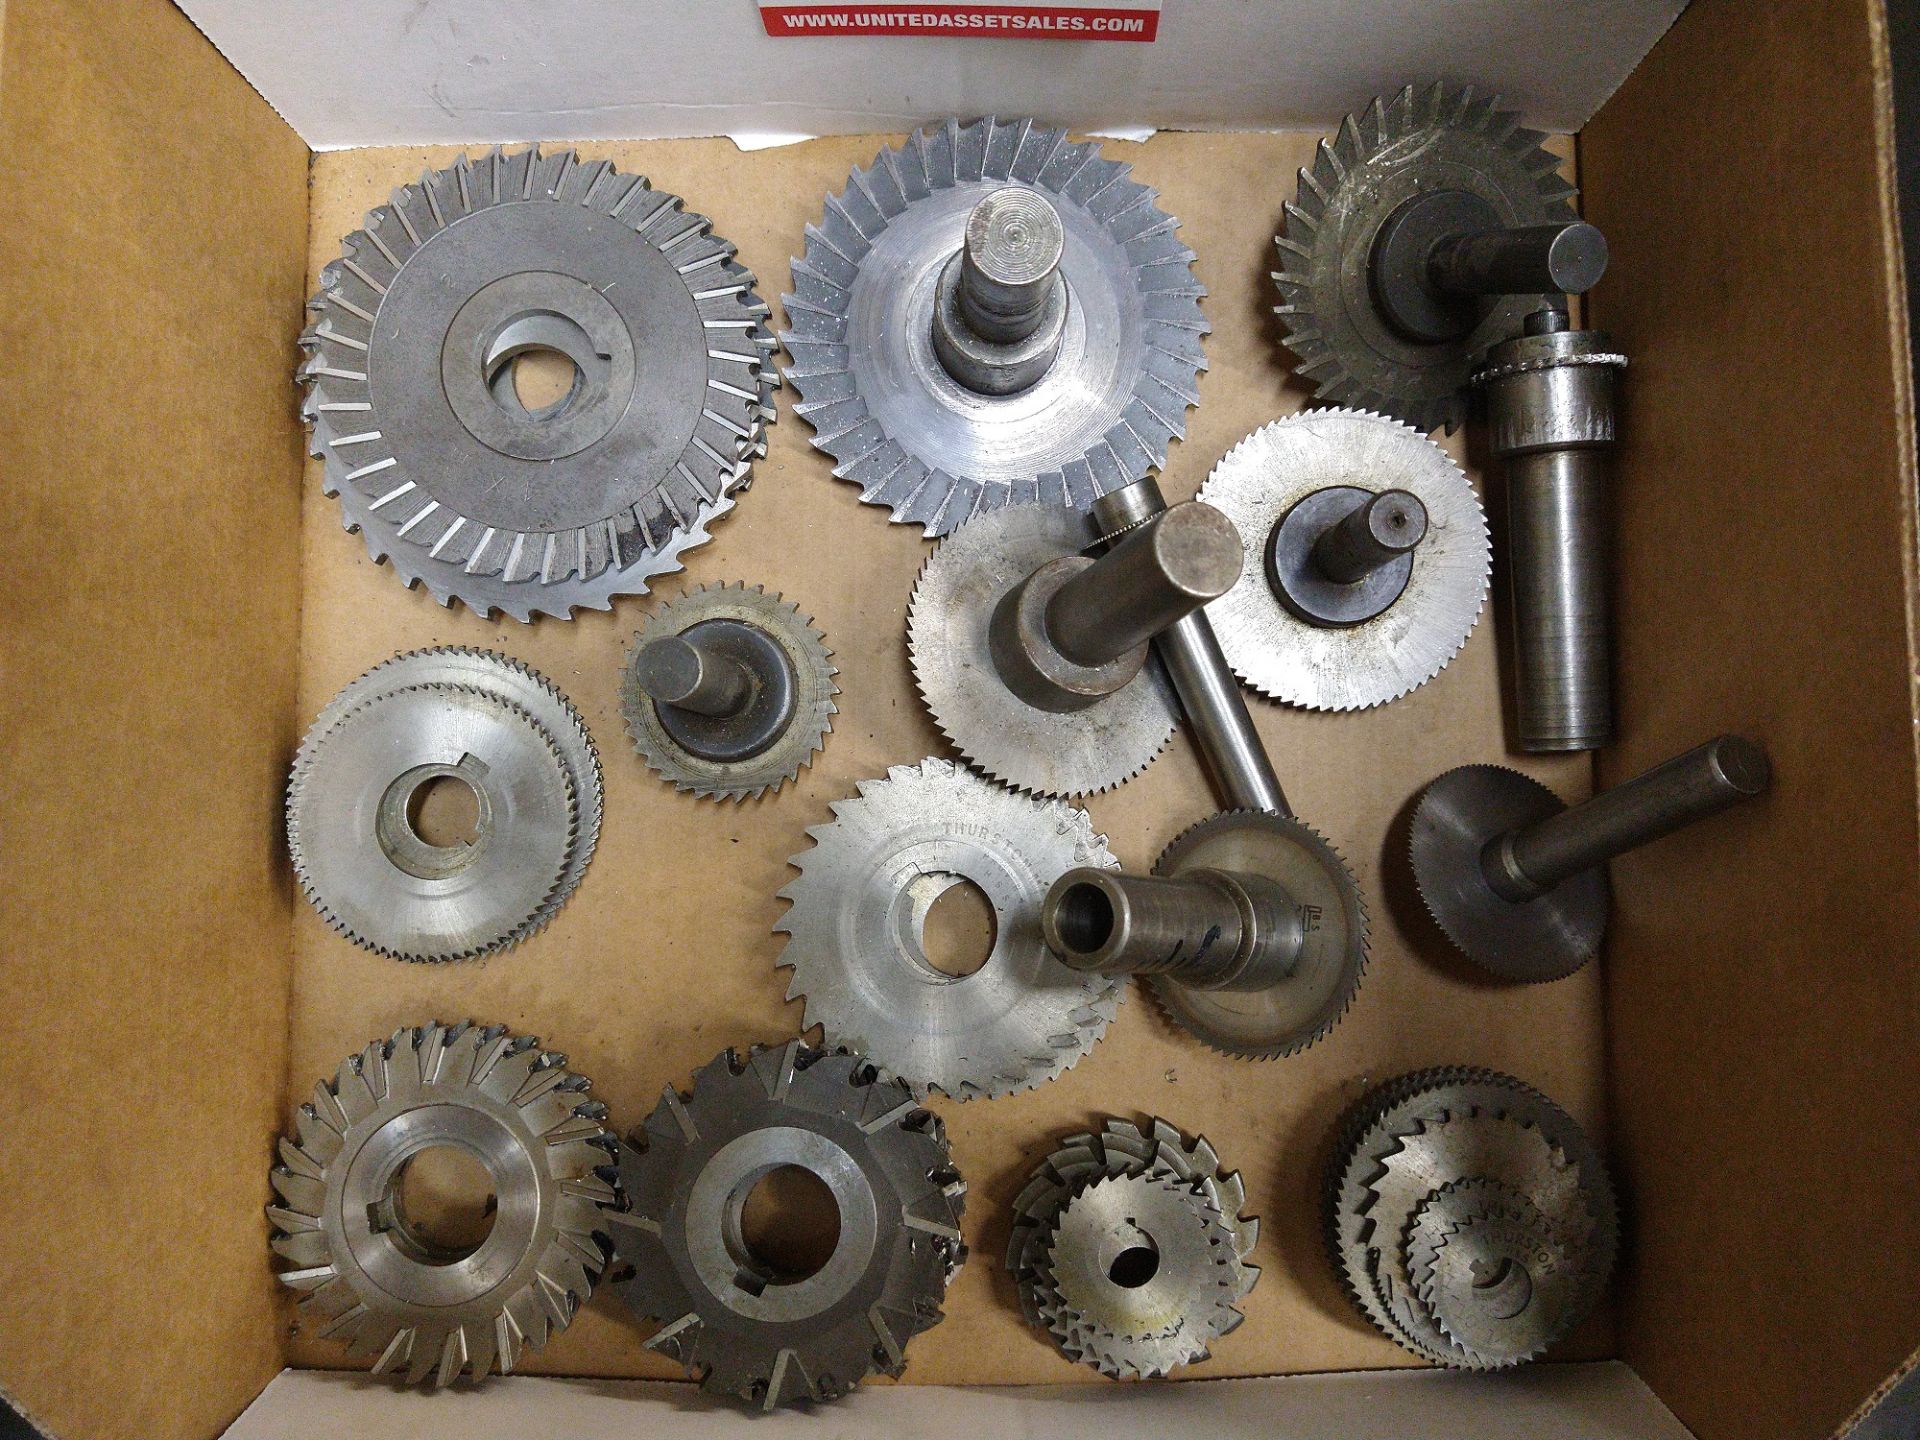 LOT - ASSORTED SAW BLADES, HOLDERS